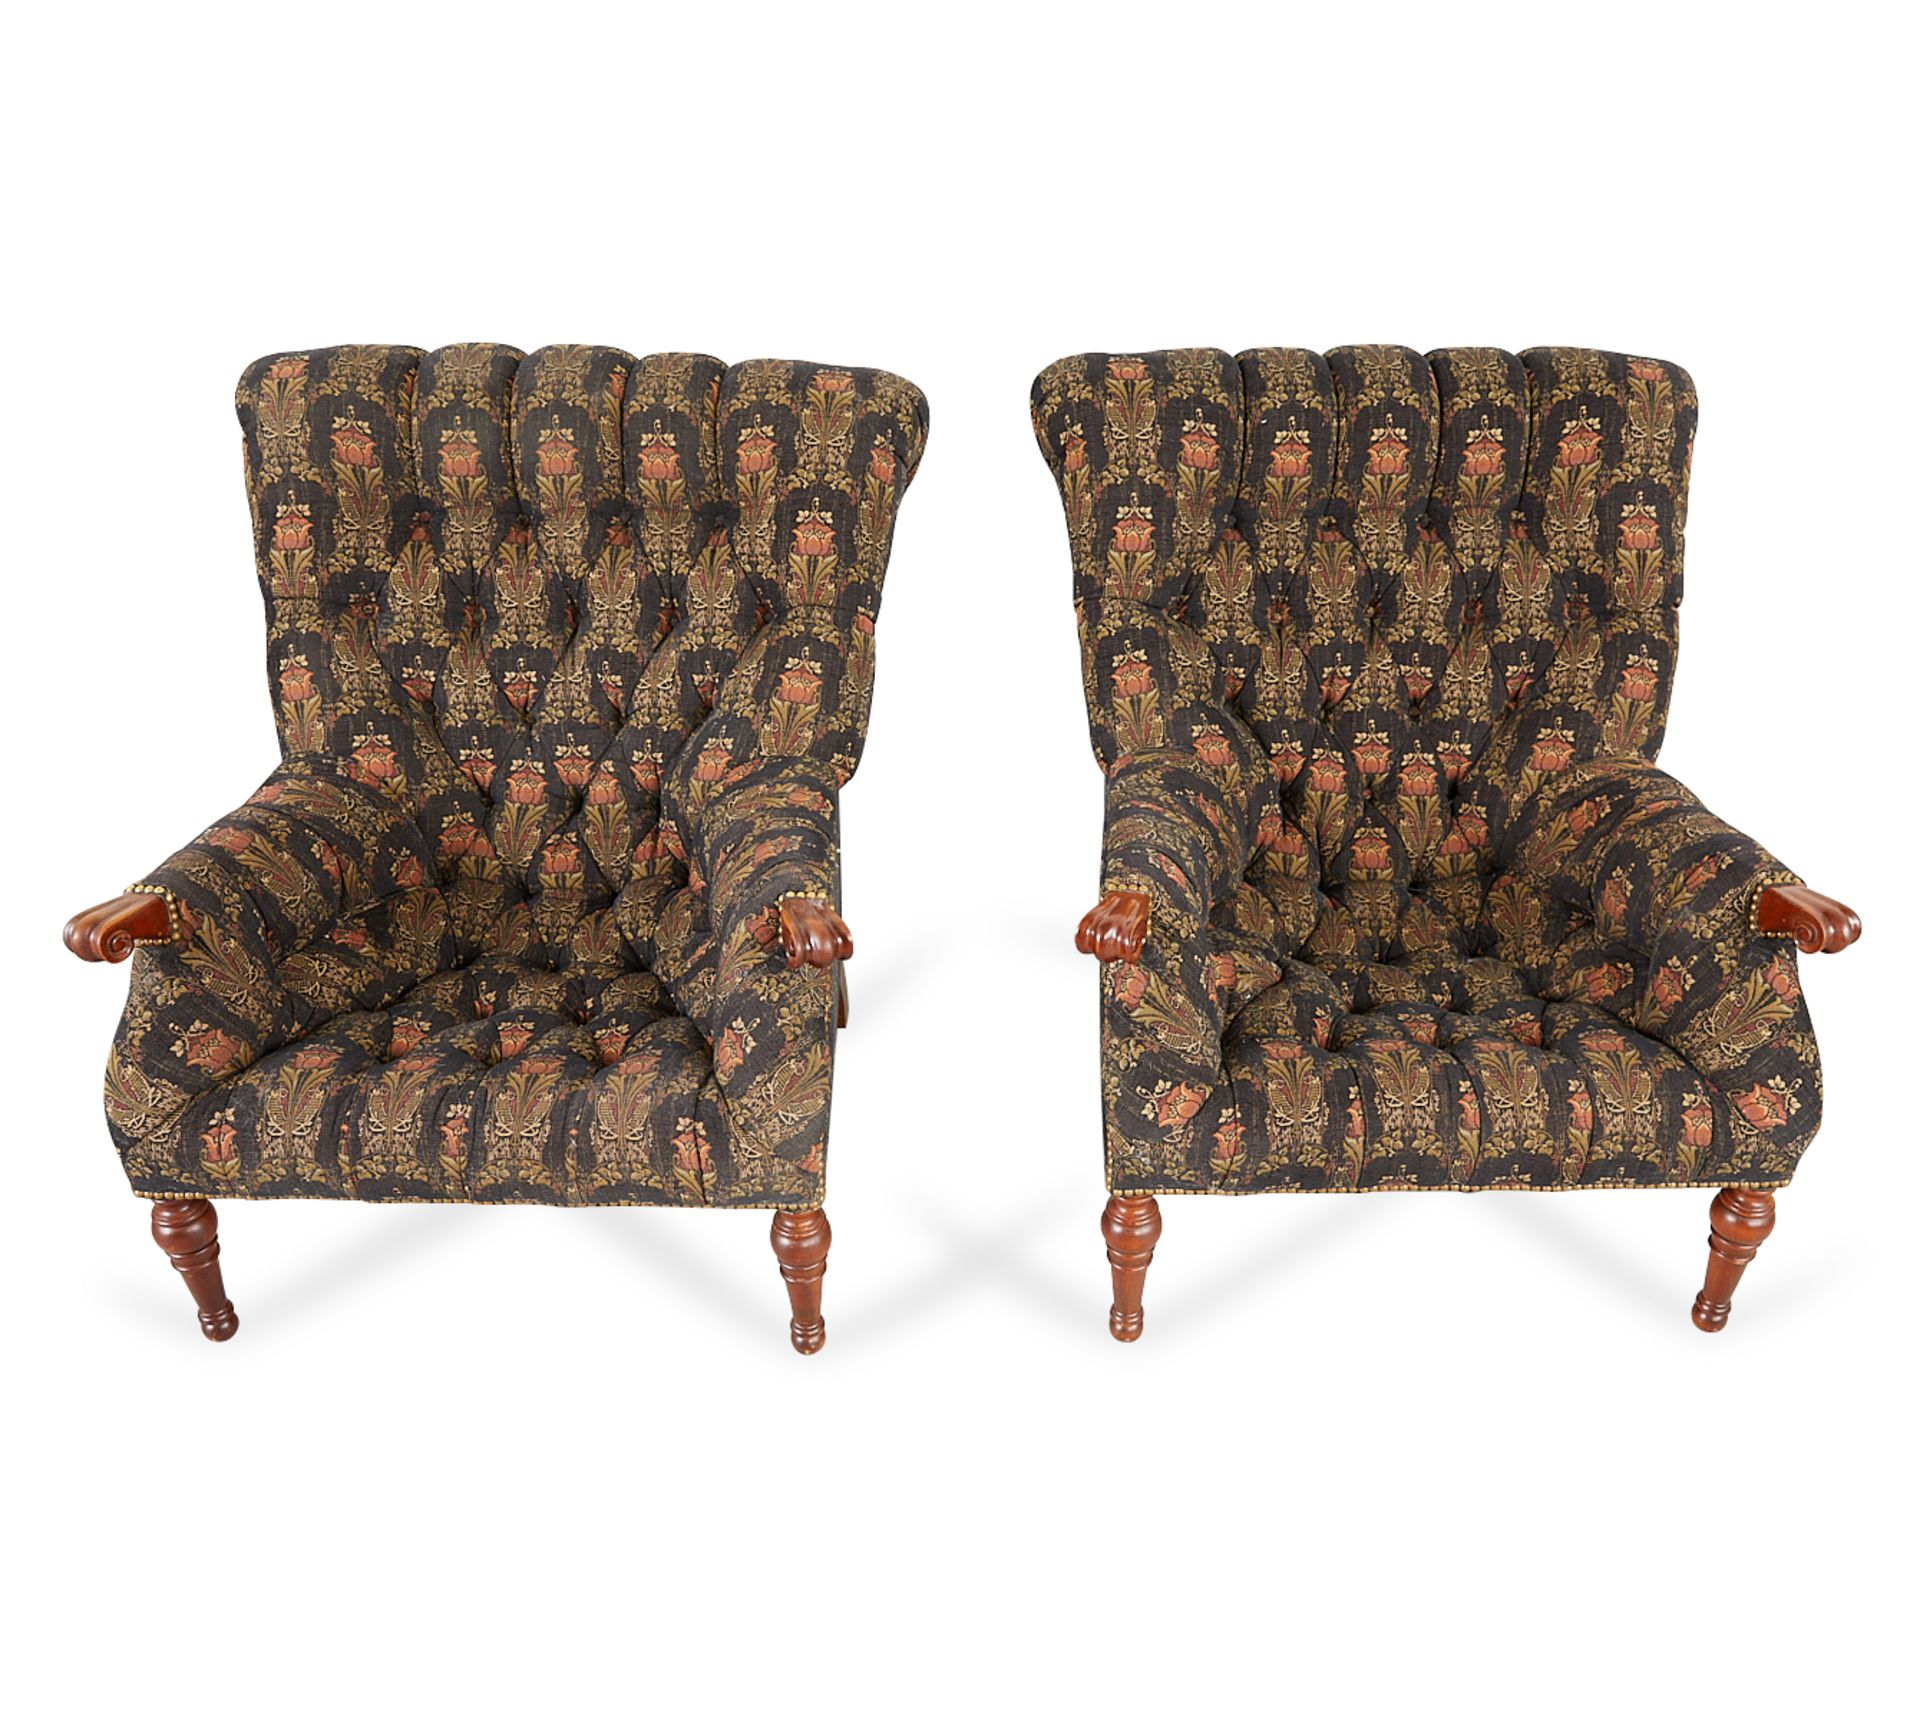 Pair of Stickley Tufted Chairs w/Ottomans - Image 9 of 22